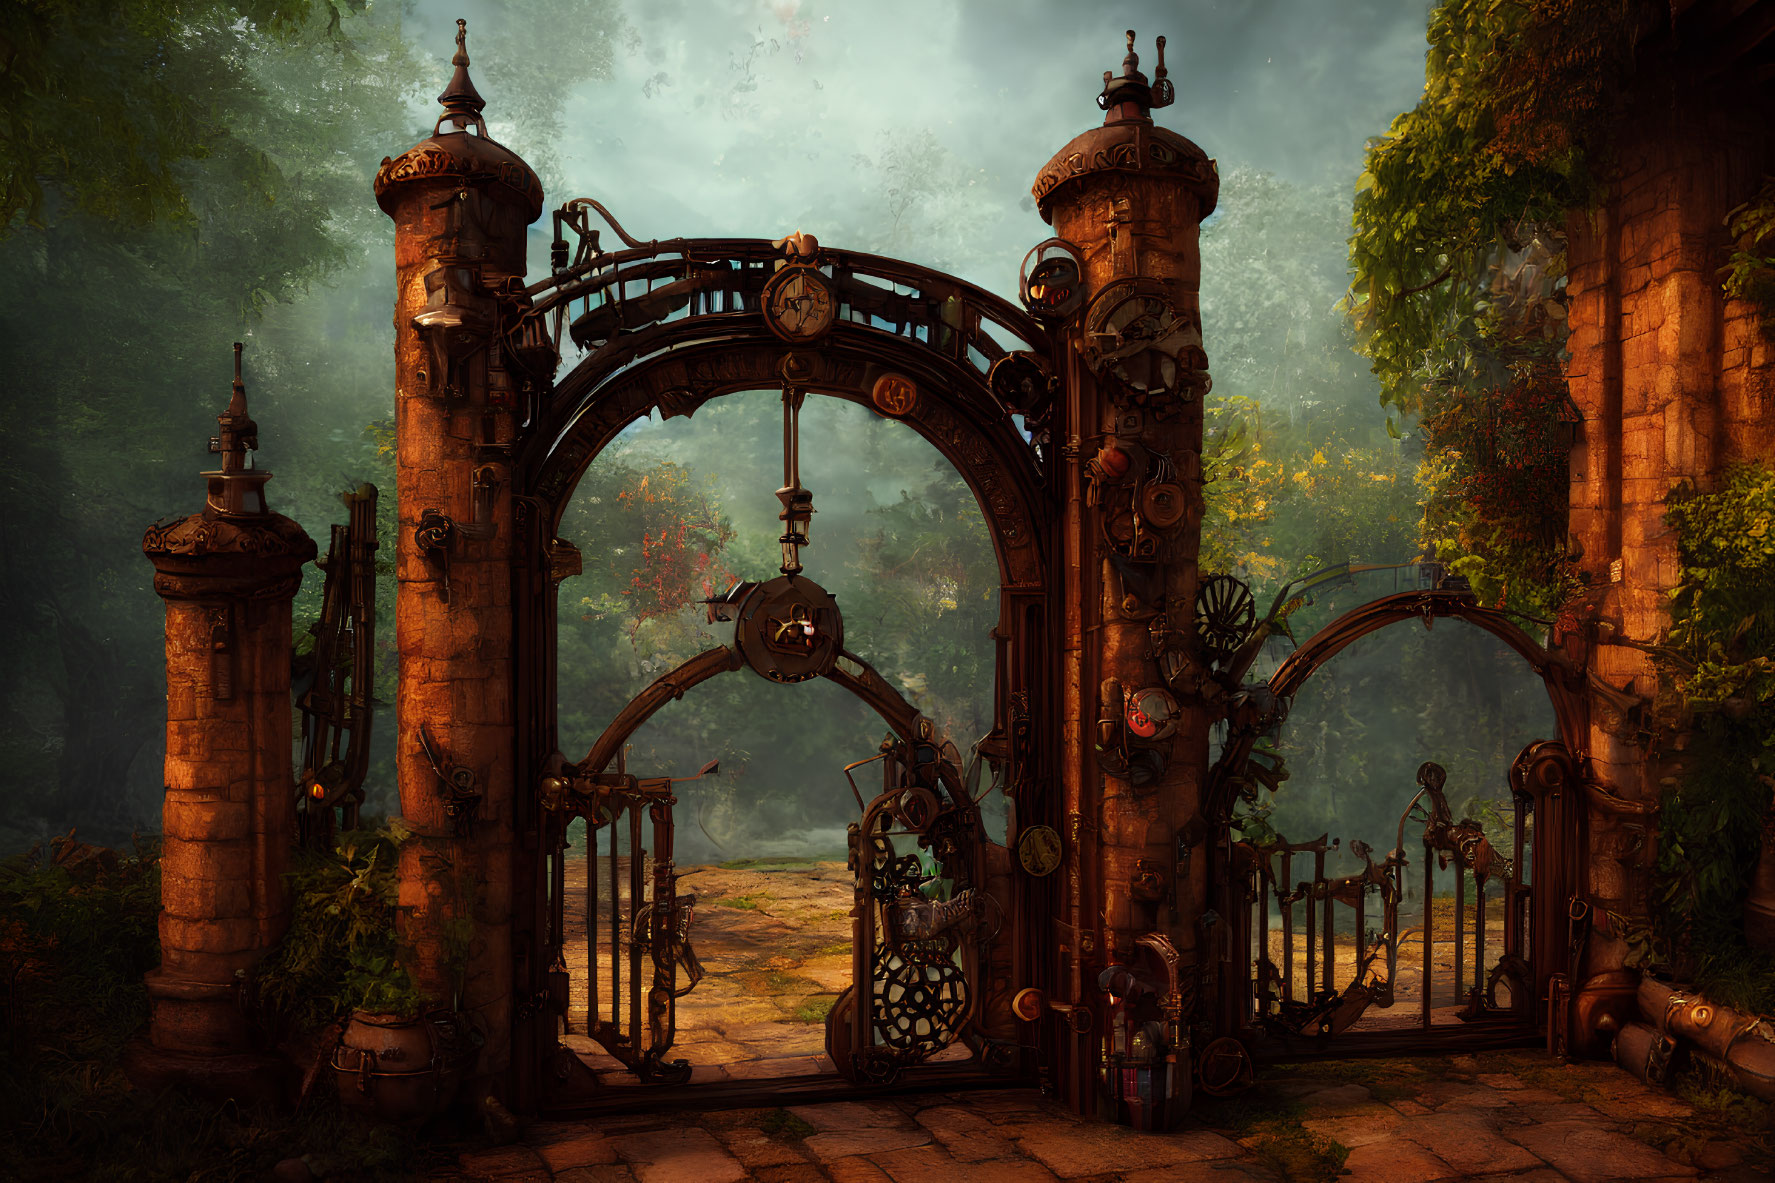 Metal gate with stone pillars in lush forest setting